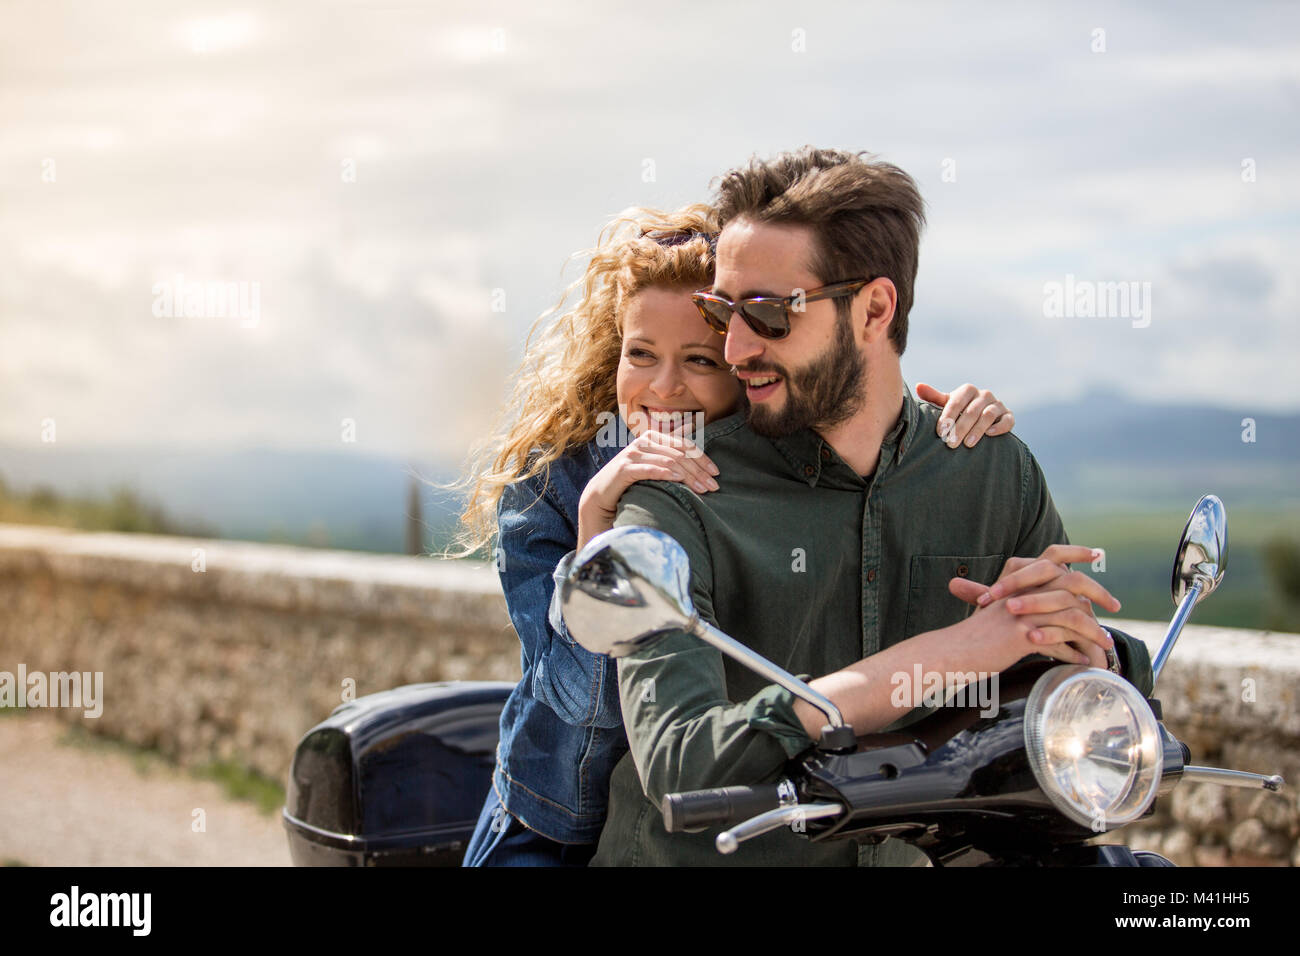 Young couple on motorbike together looking at view Stock Photo